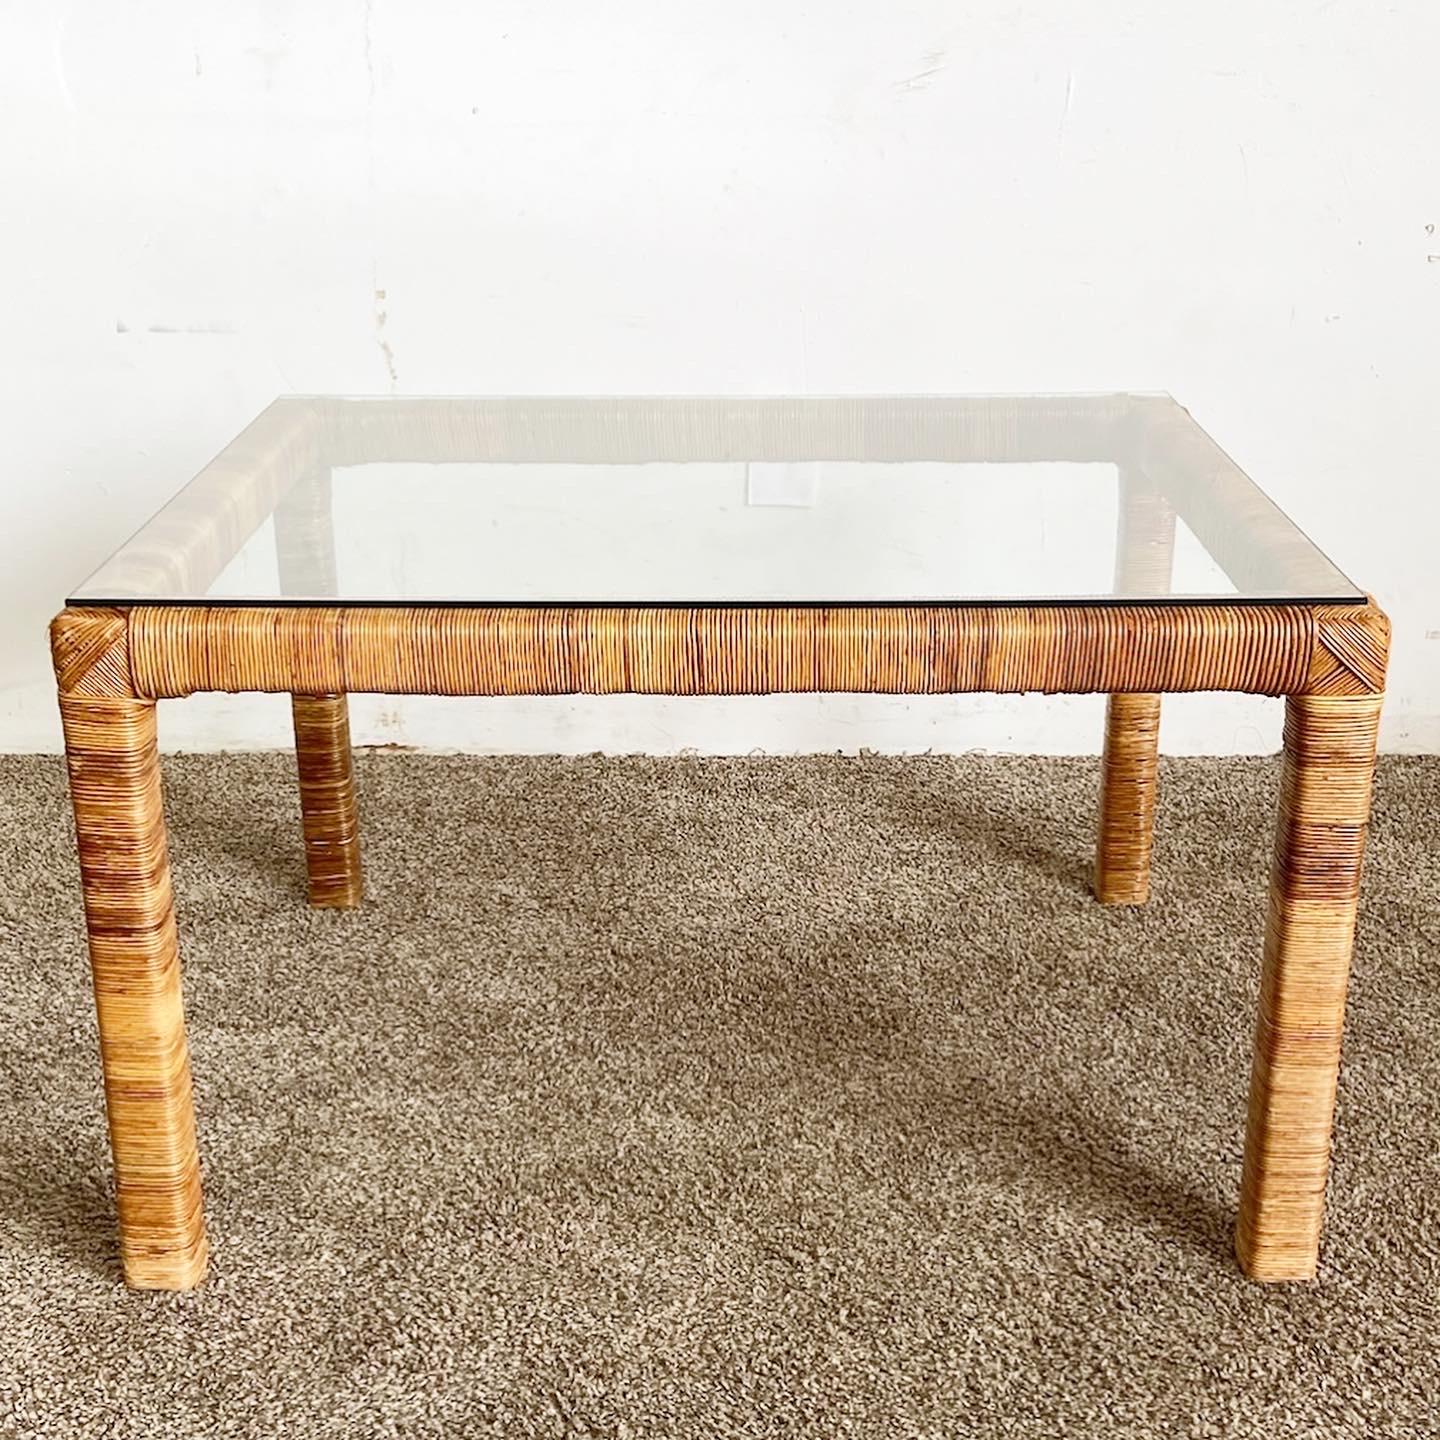 Enhance your living room with the exceptional vintage boho chic coffee table. Constructed with a thick bamboo frame, this table features rattan with an inlaid glass top and a wicker lower tier, combining style and functionality in a unique two-tier